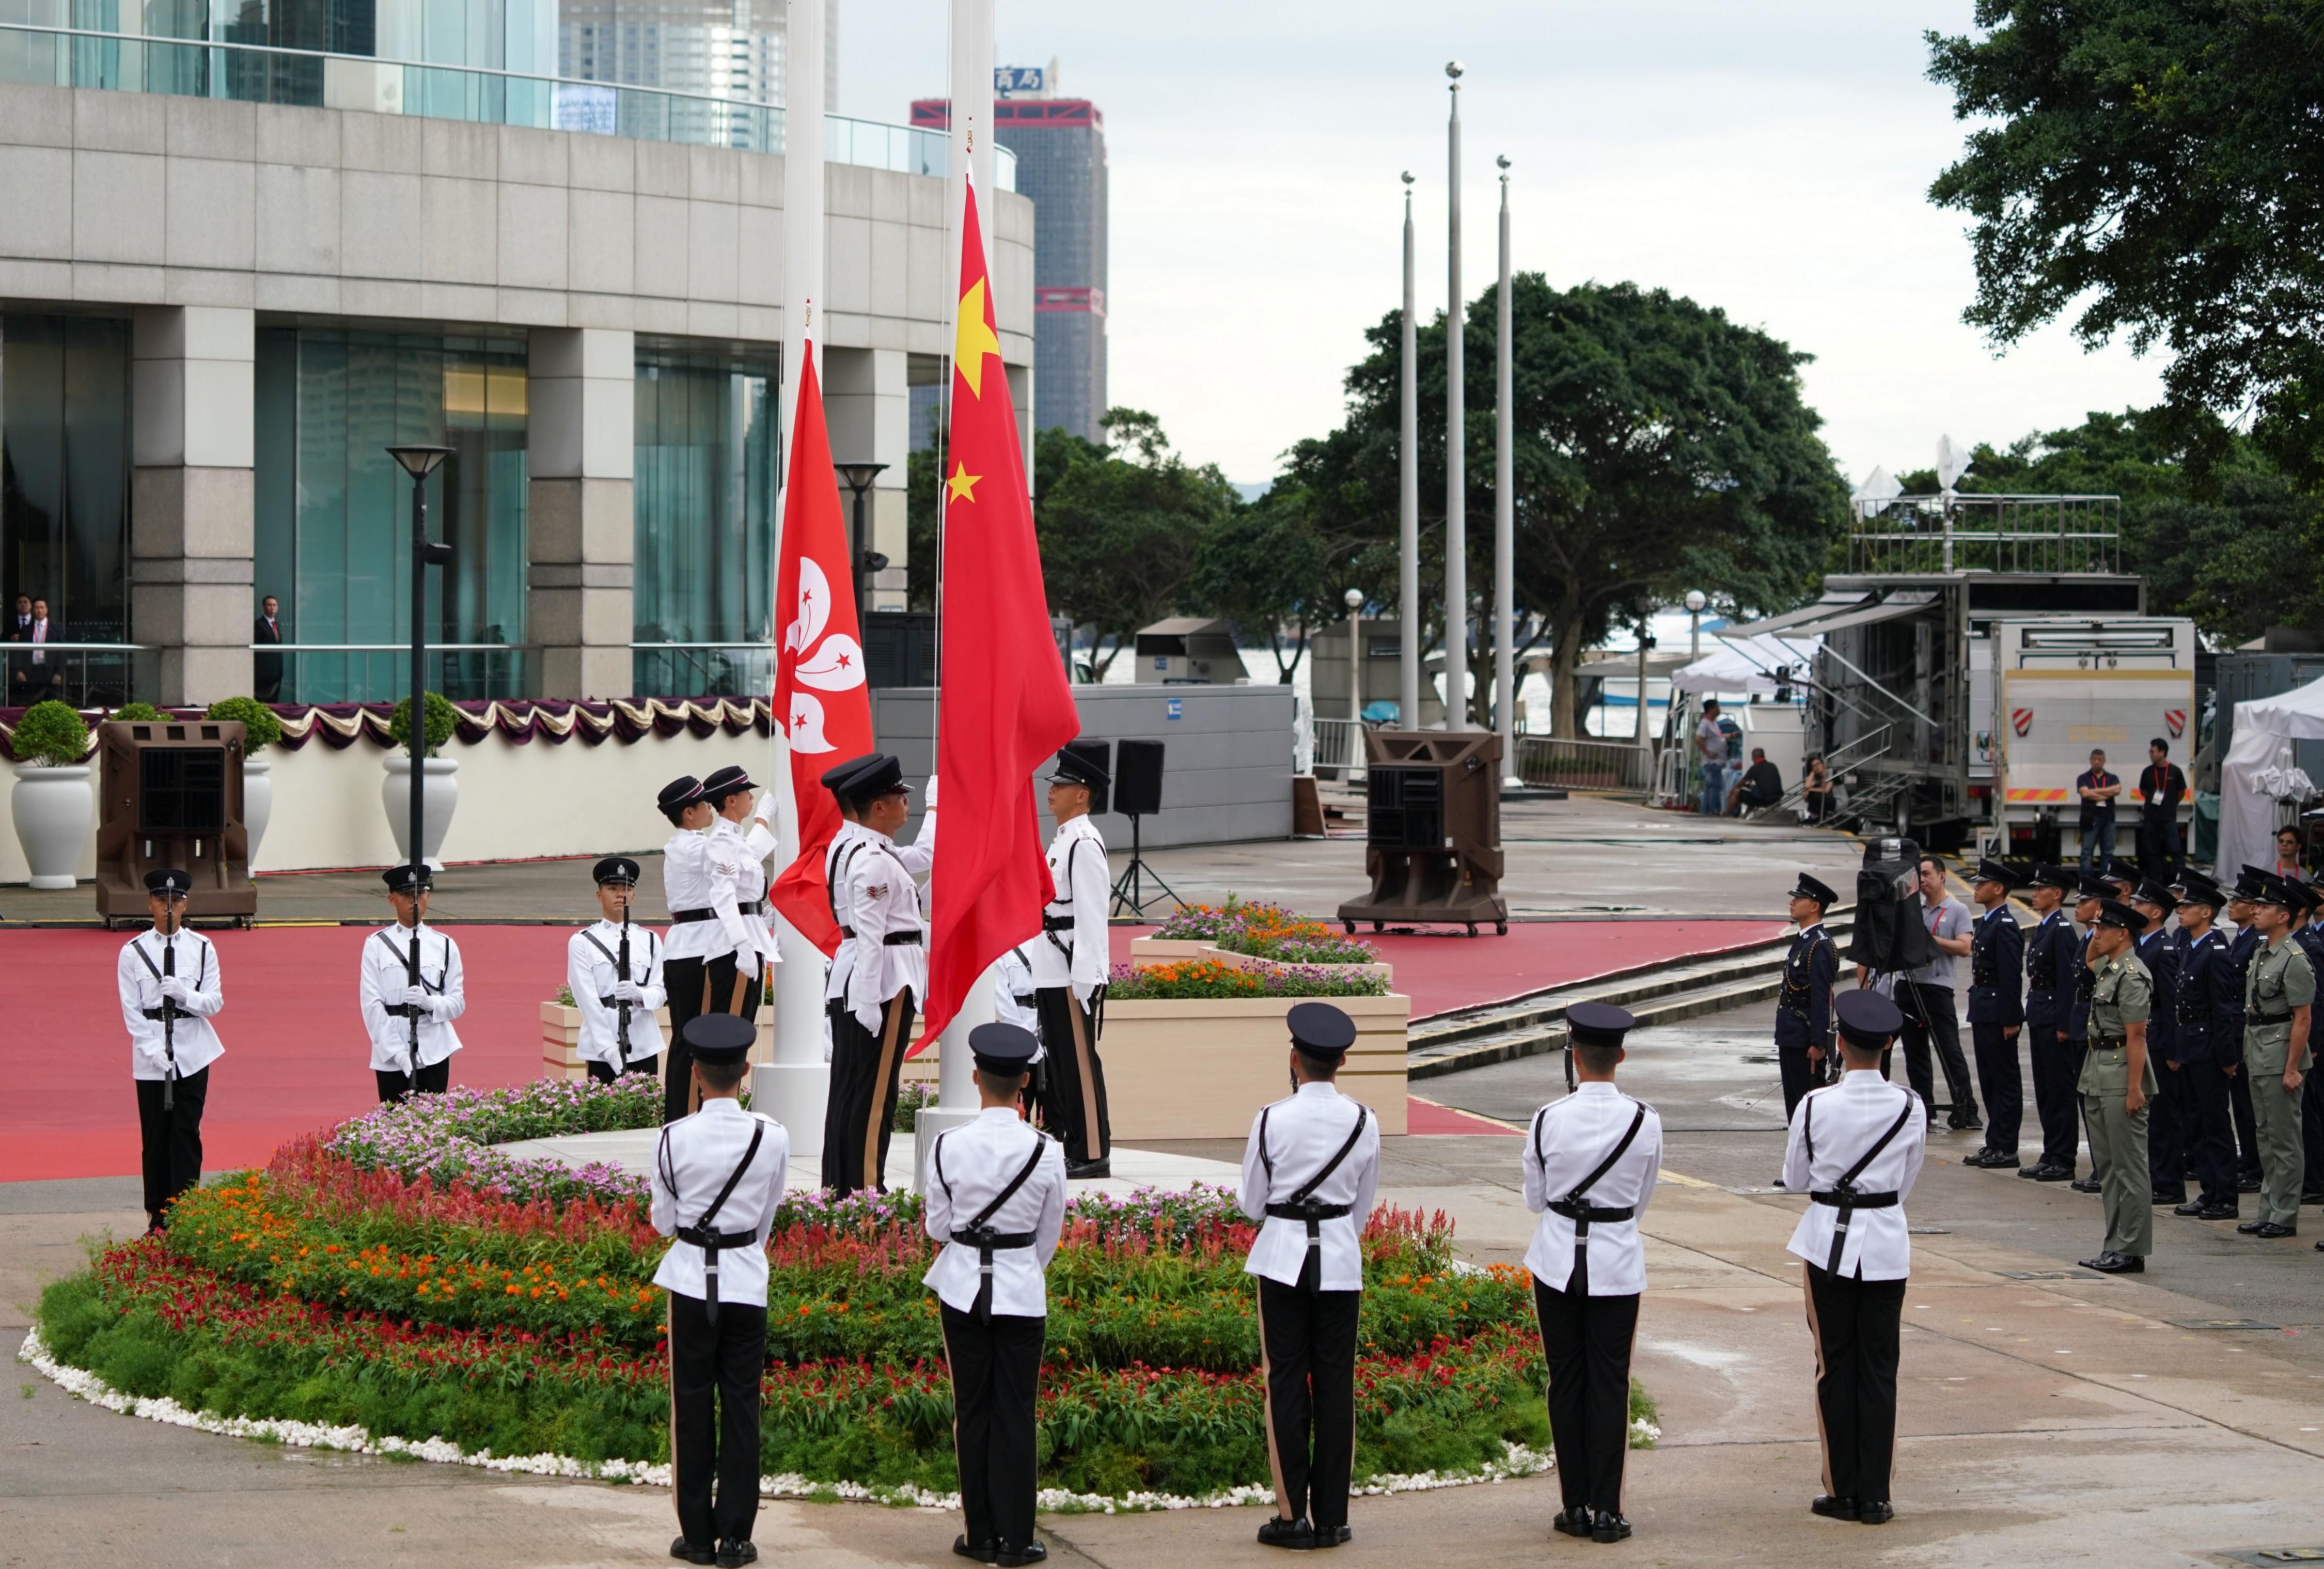 Police officers attend a flag raising ceremony to commemorate the 22nd Anniversary of the Establishment of the Hong Kong Special Administrative Region (SAR) at Golden Bauhinia Square.